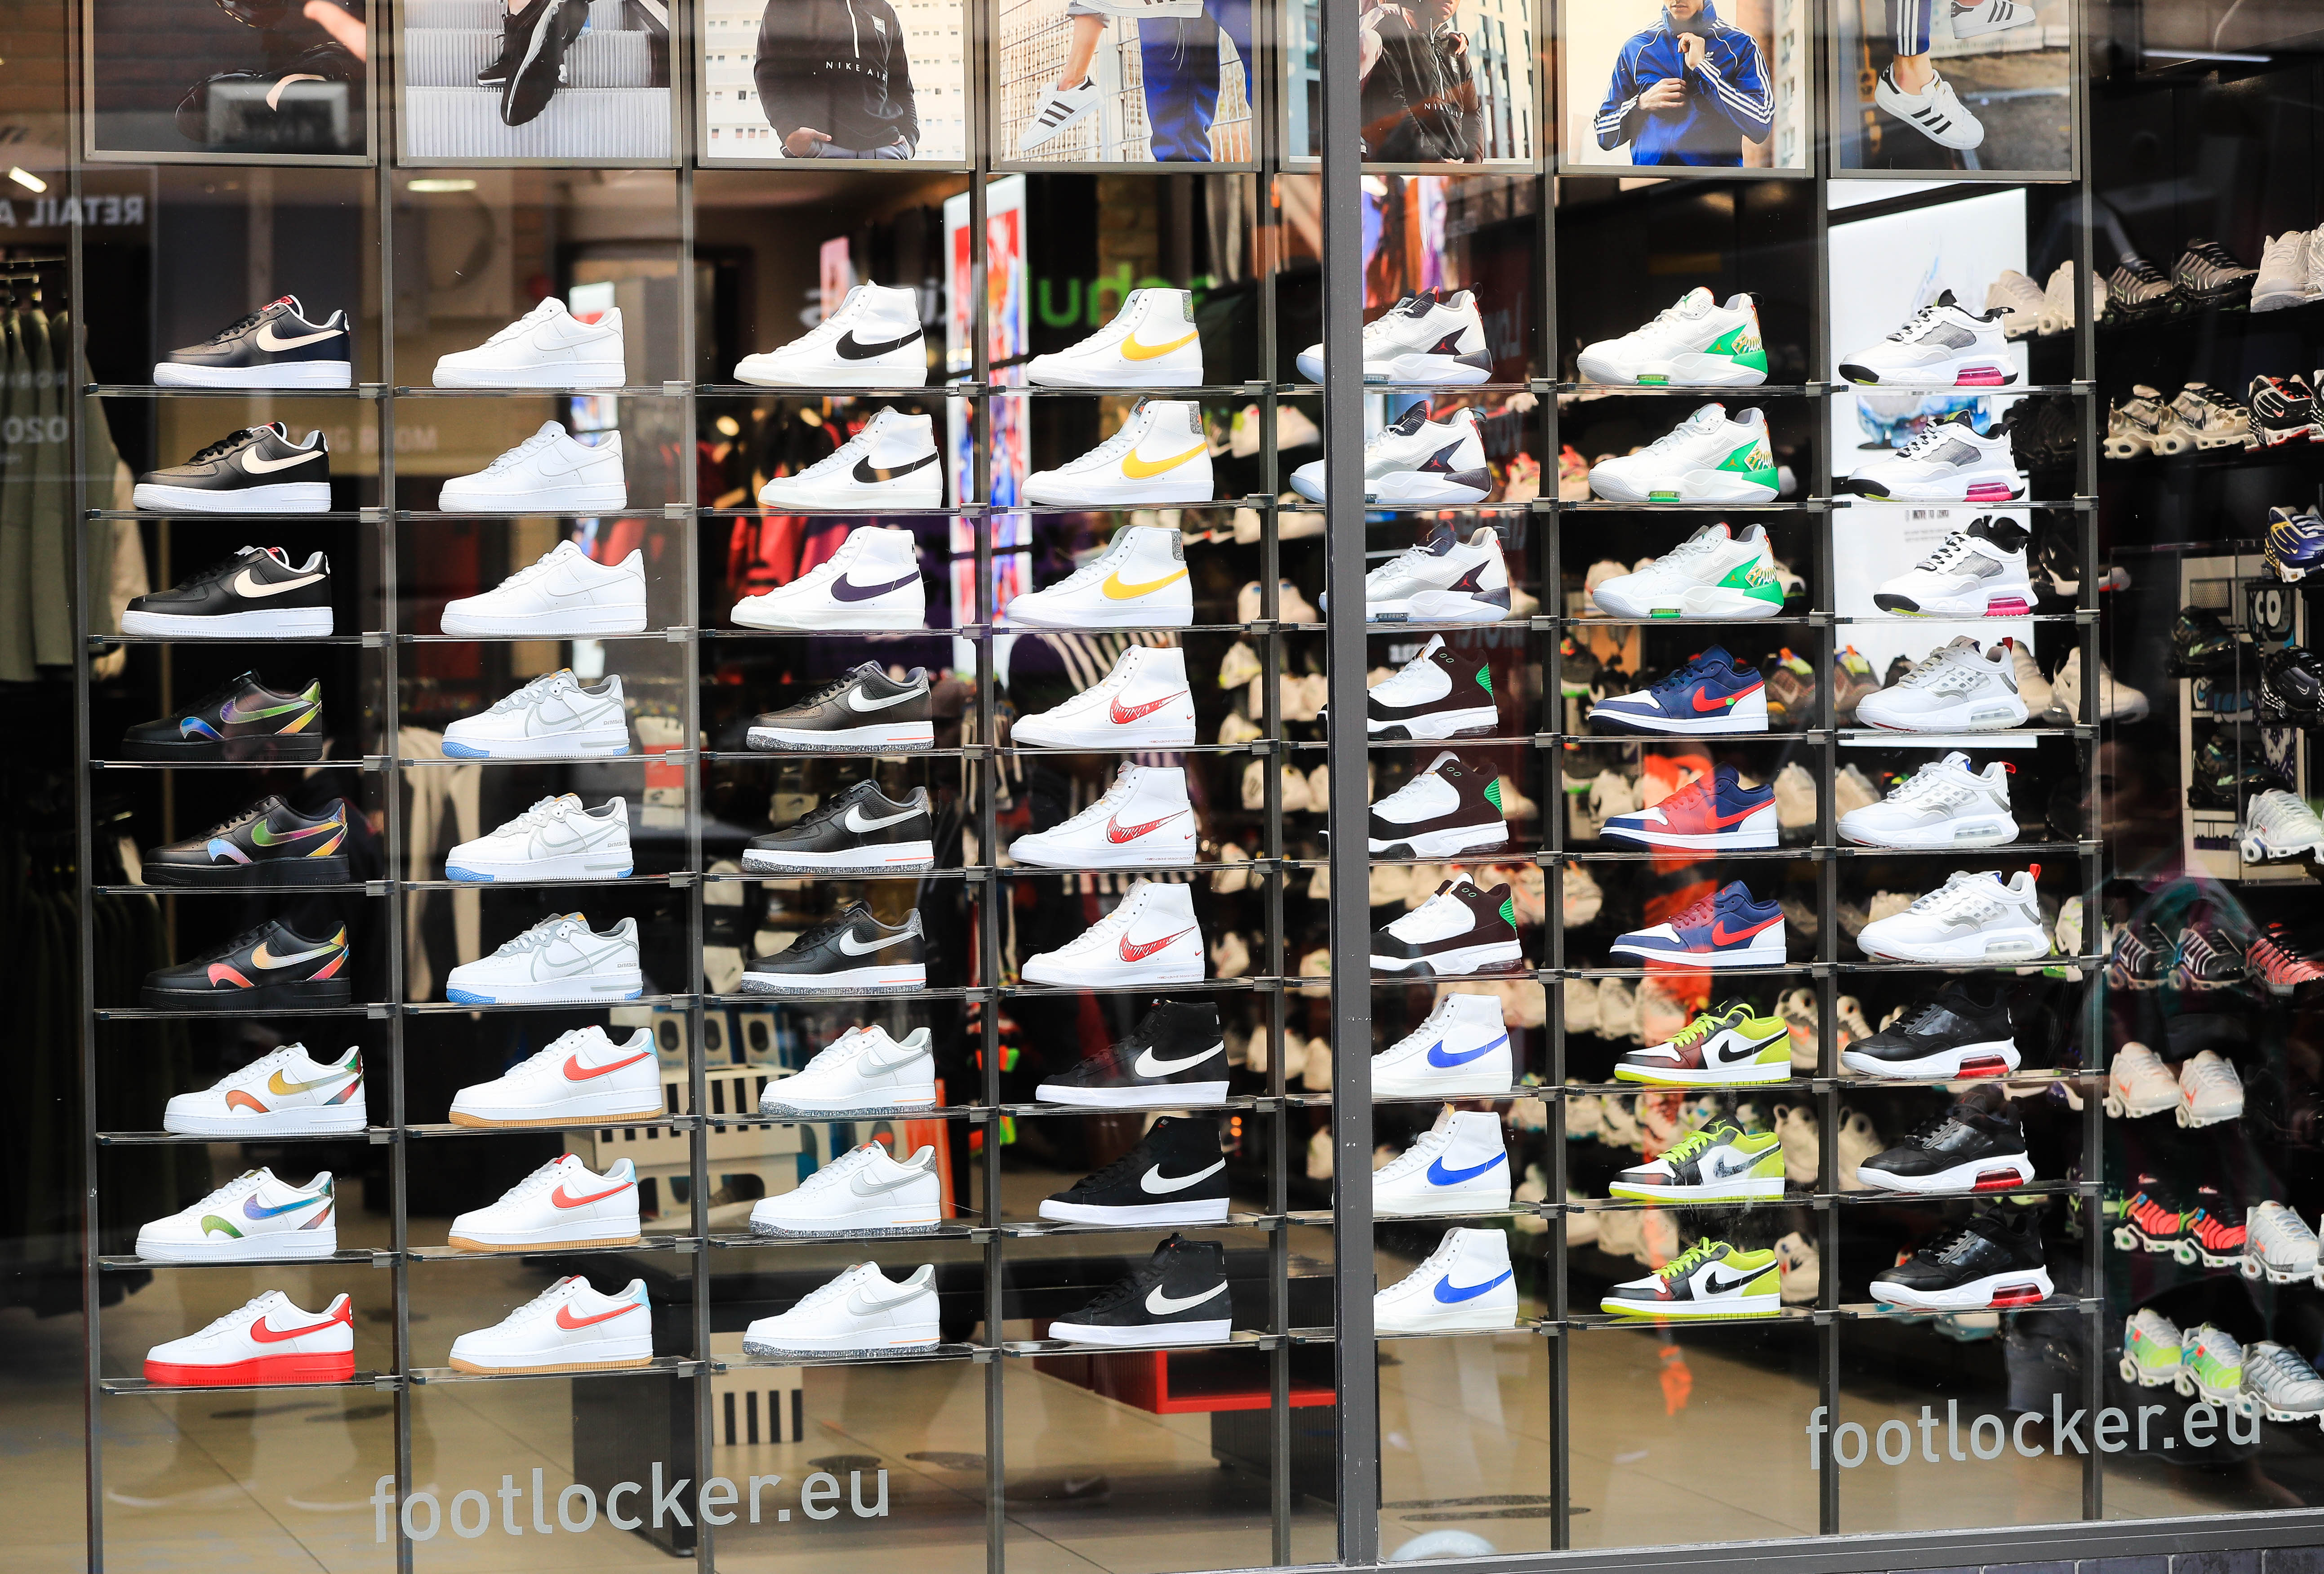 Alinear tenga en cuenta reposo There's just so much energy around the sneaker market:' Footlocker CEO on  company's growth